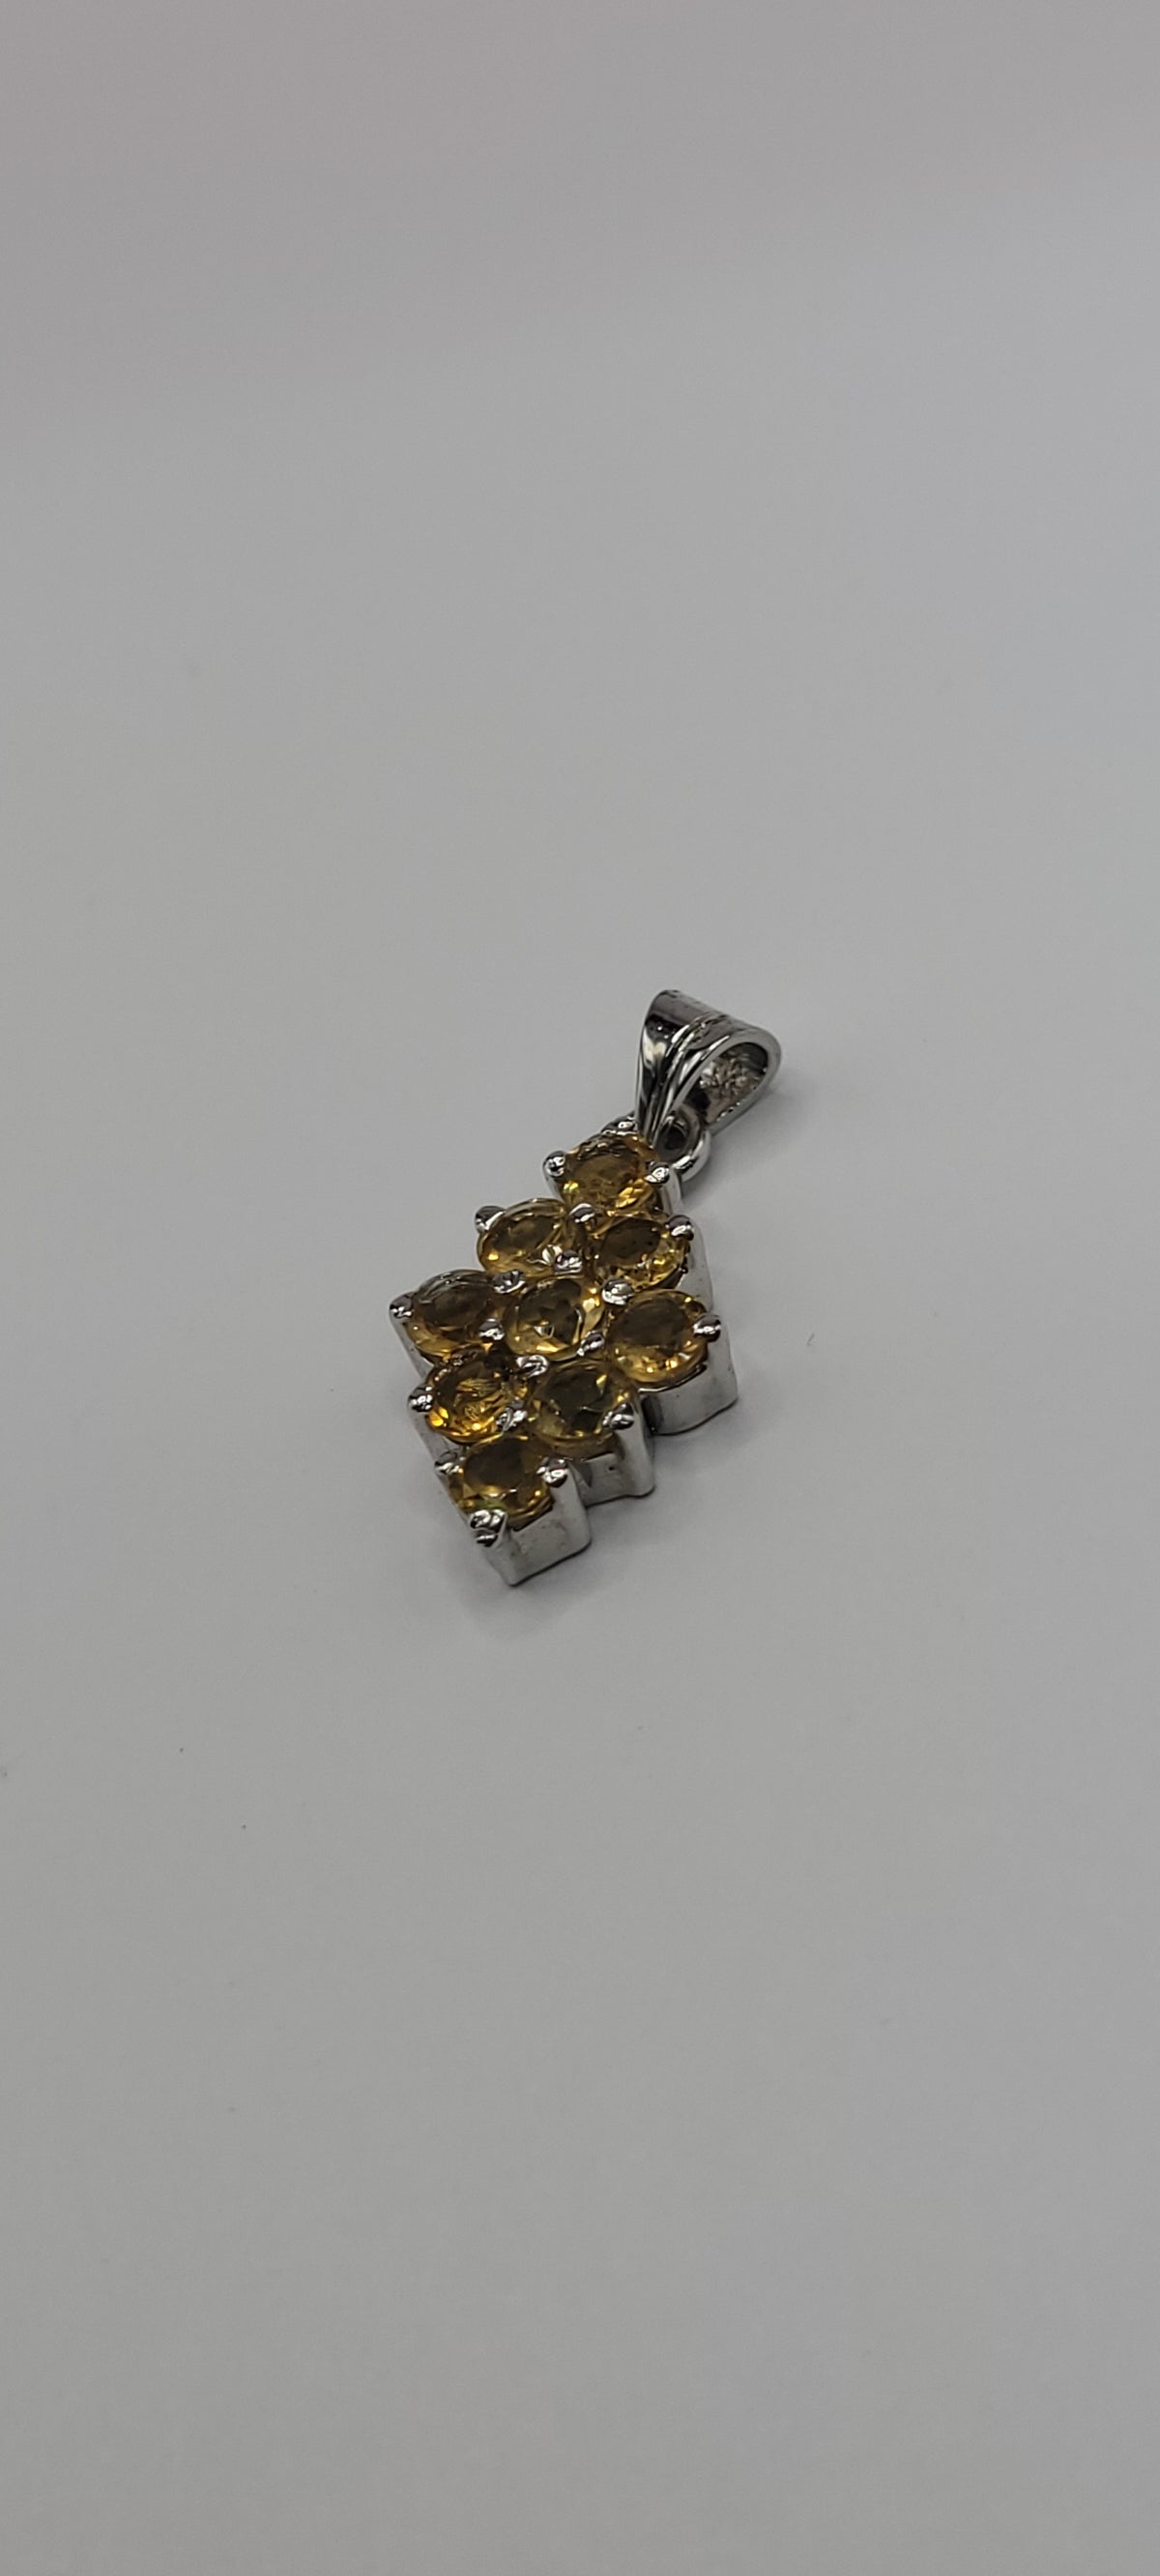 Yellow Topaz Stone Surrounded with Zirconia on Sterling Silver